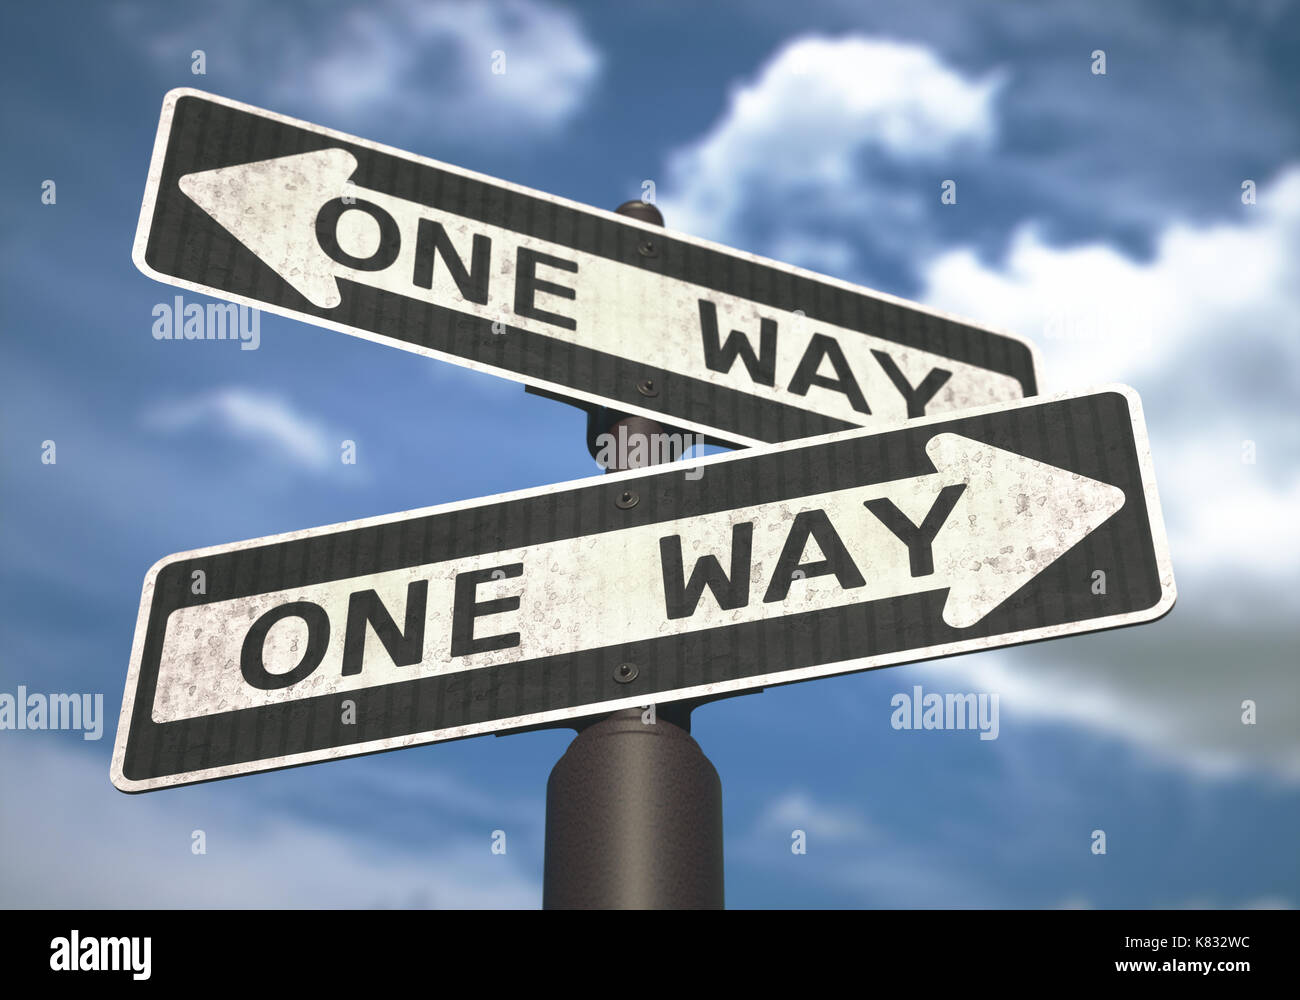 Conceptual image of one-way sign with cloud and blue sky in the background. Stock Photo